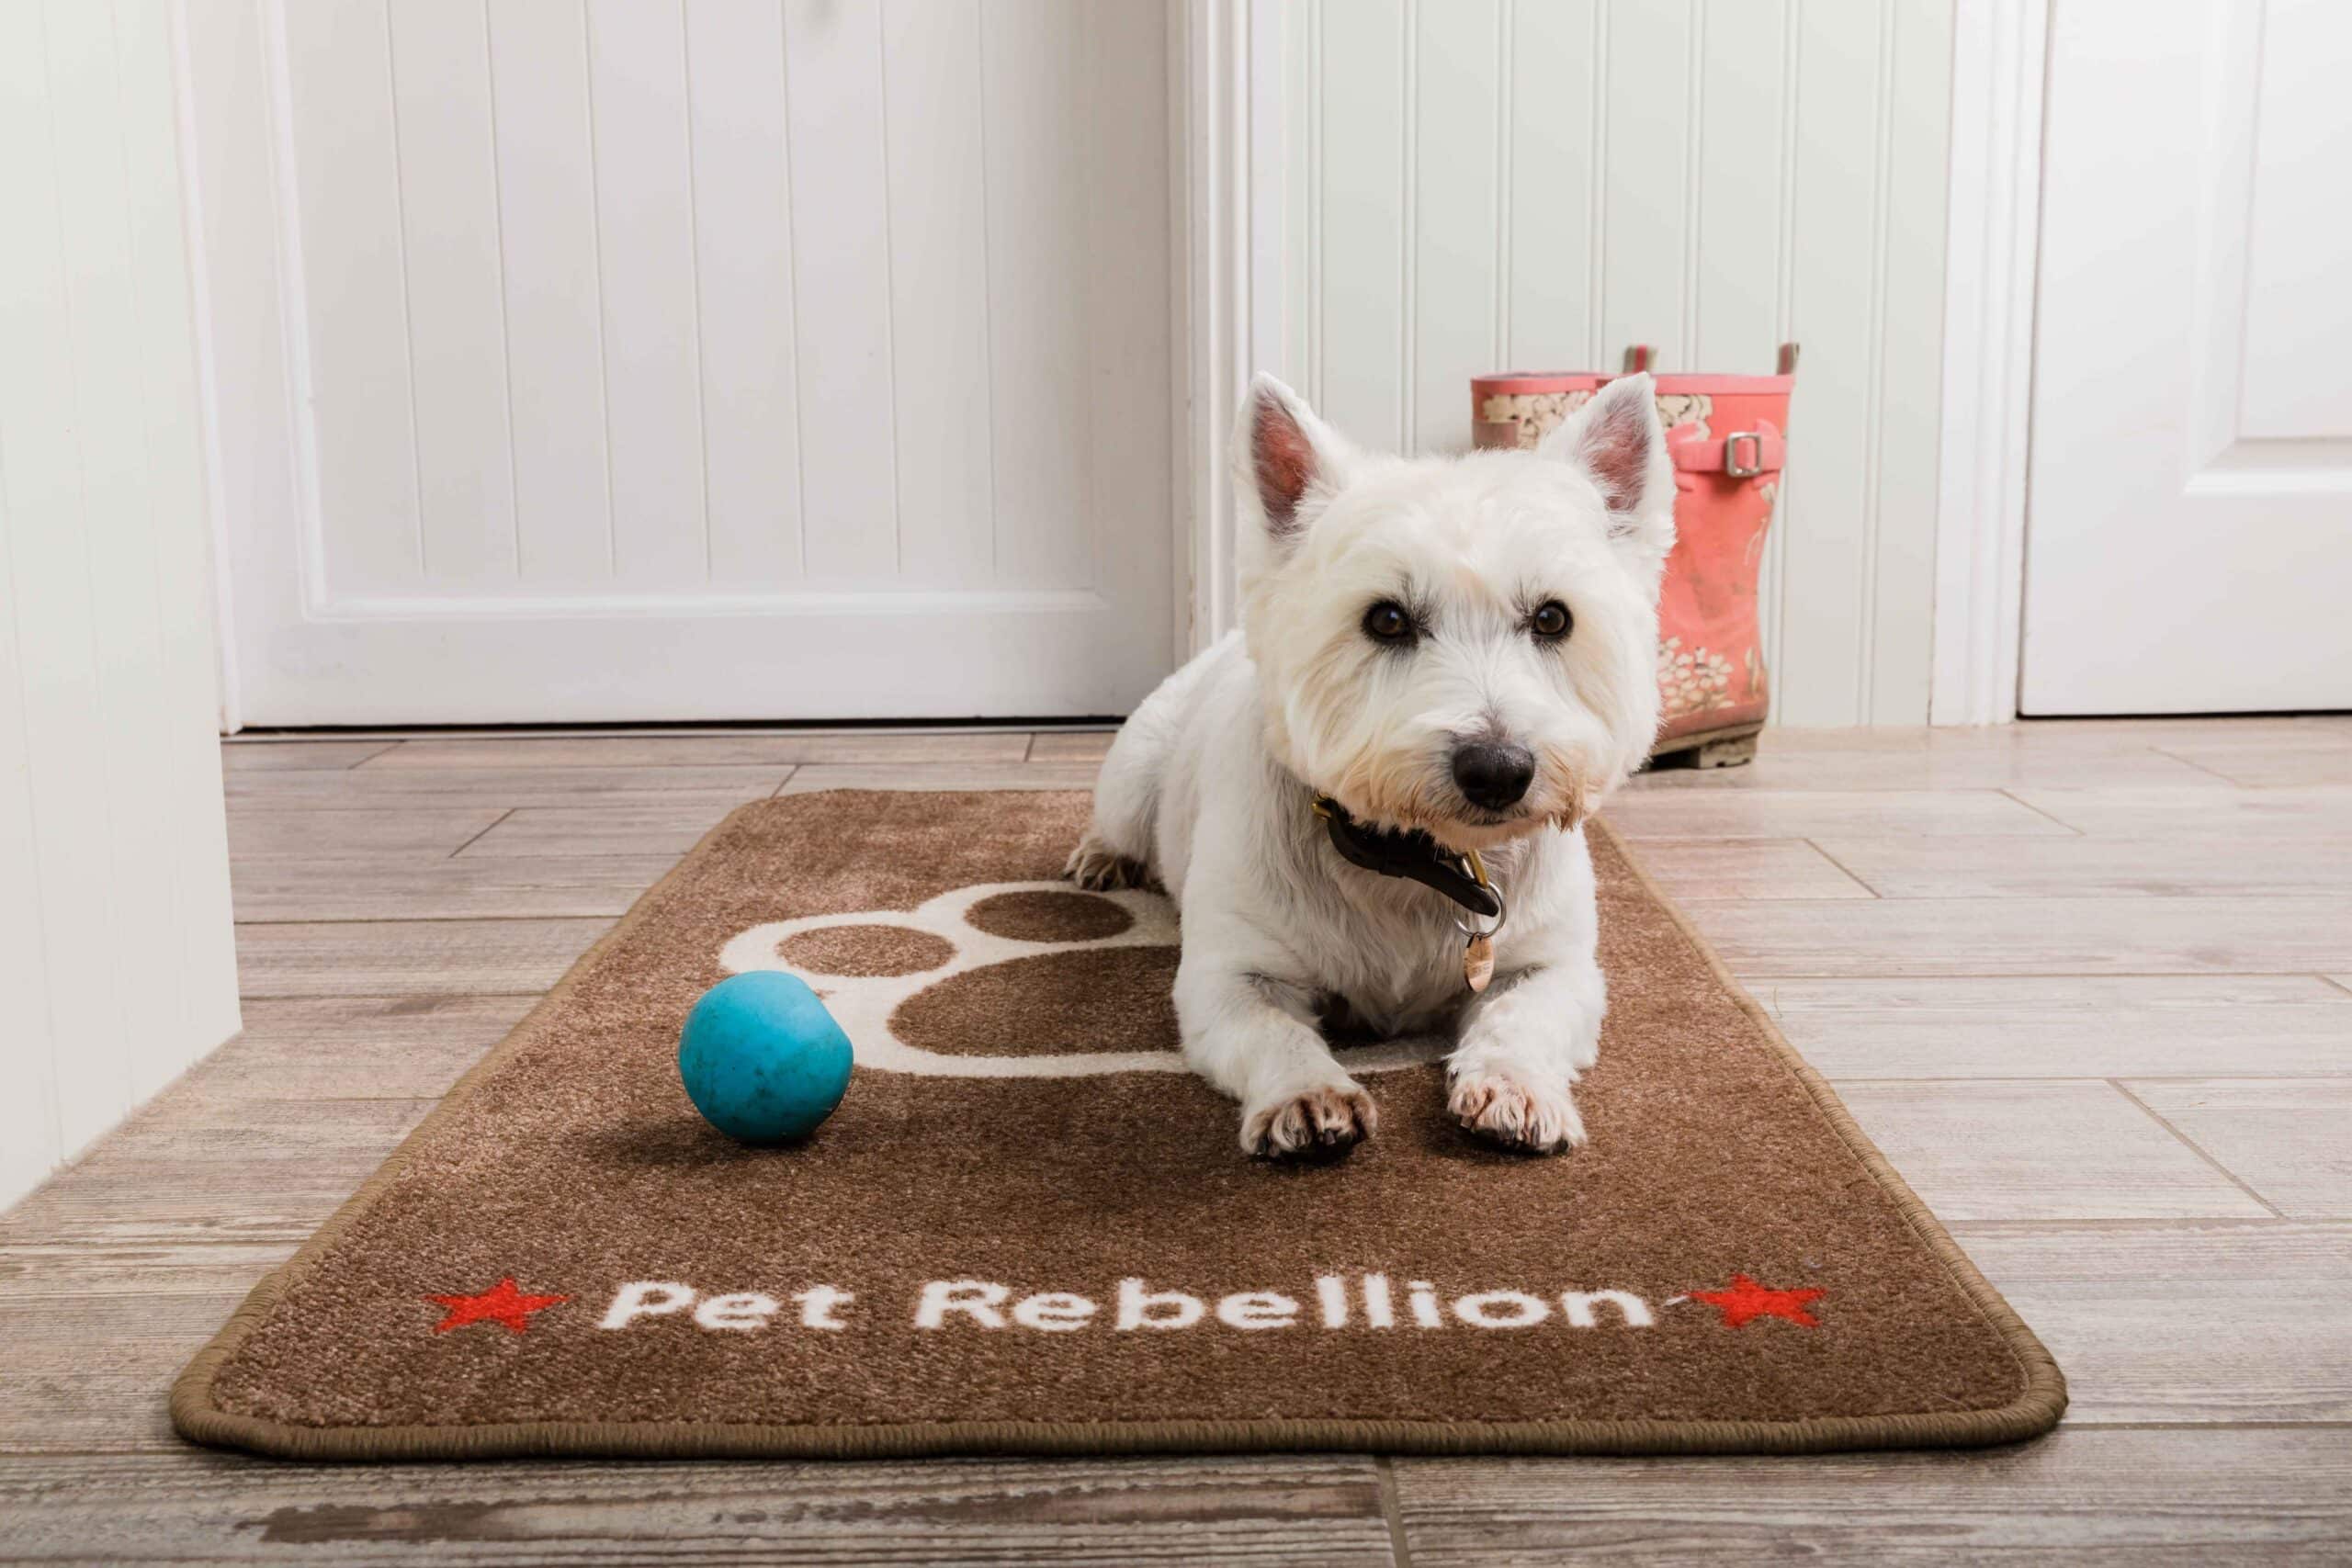 Pet Rebellion, Stop Muddy Paws Biscuit